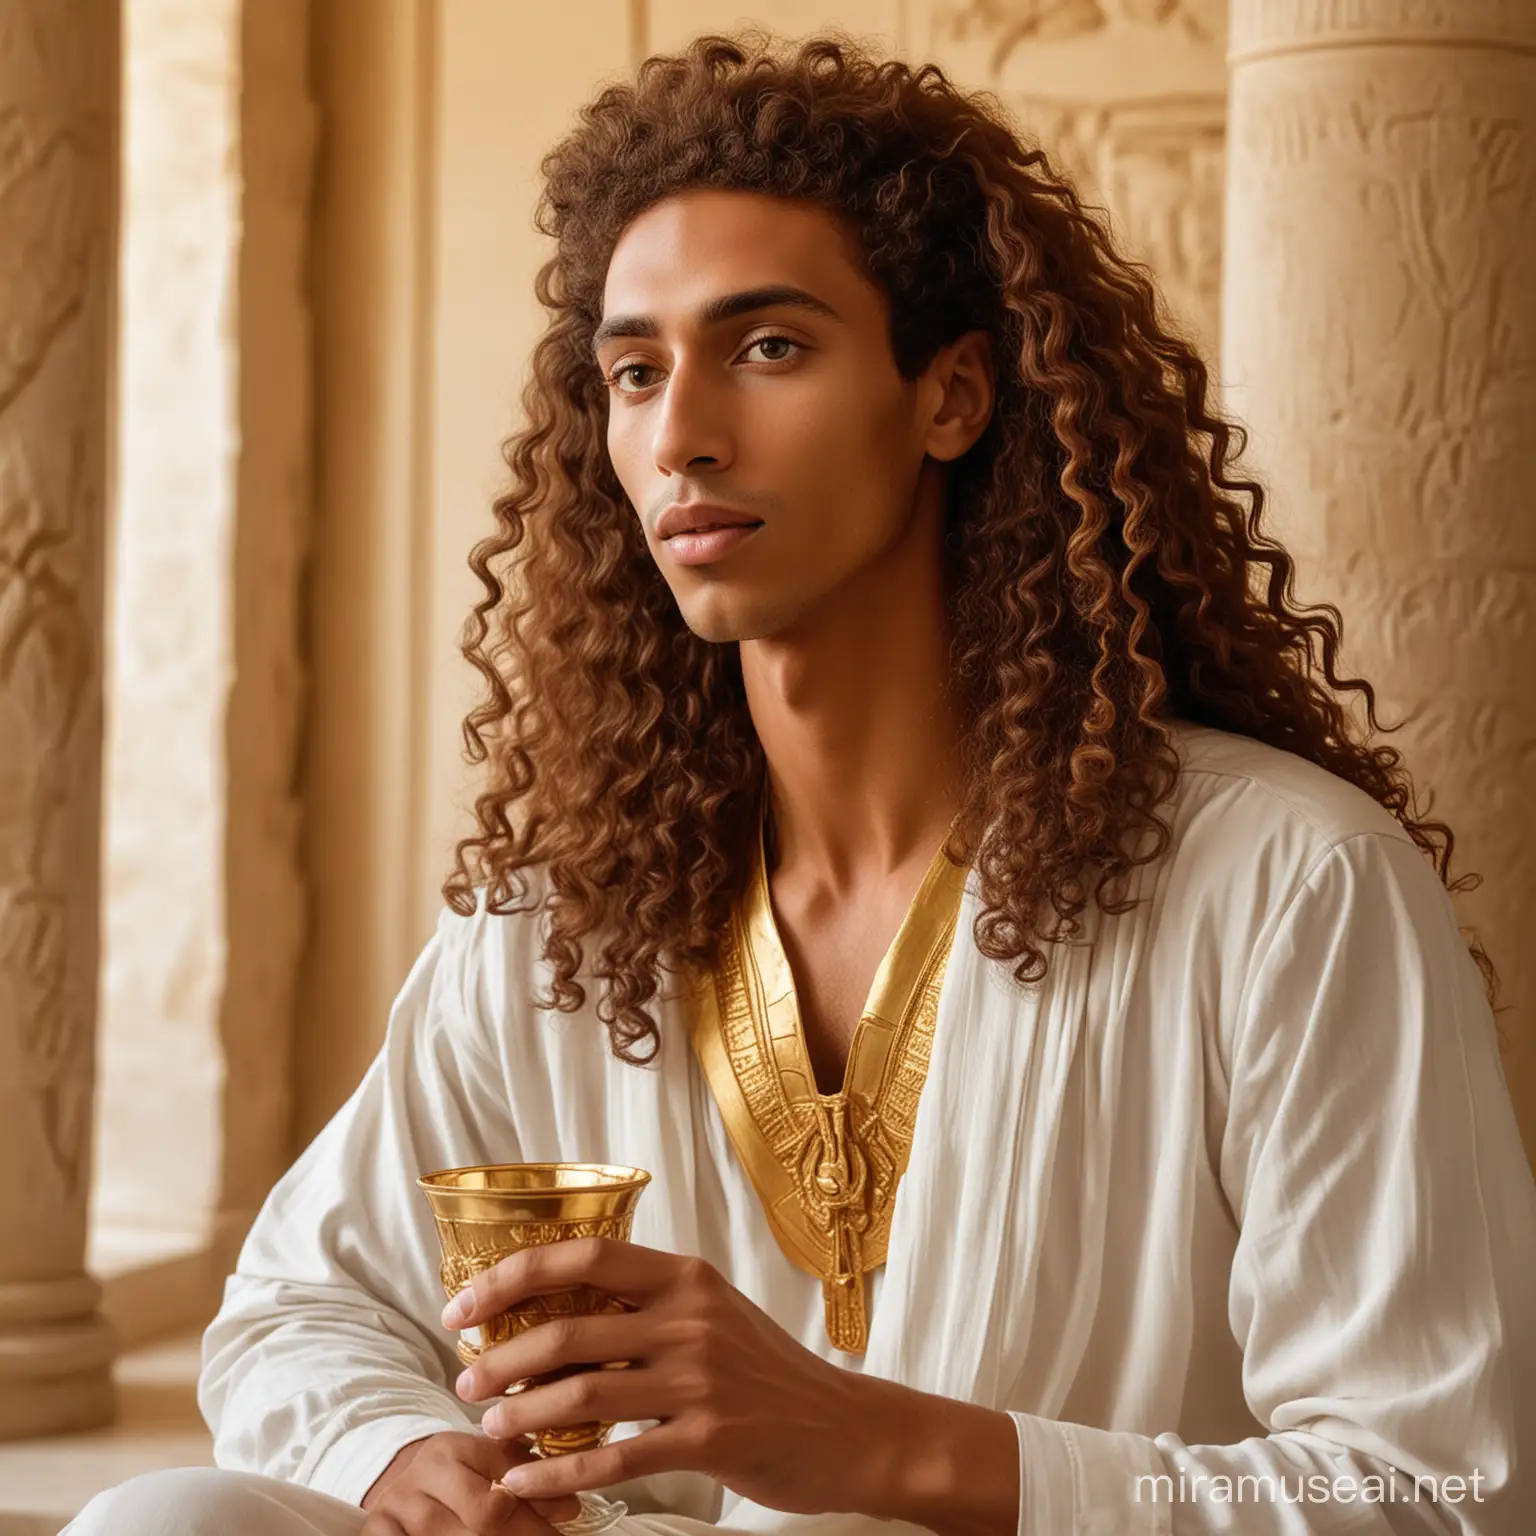 The son of the Pharaoh, Akhenaten, has attractive and sharp features, long curly hair, sitting in a white palace room with gold behind him, and holding a cup of wine 